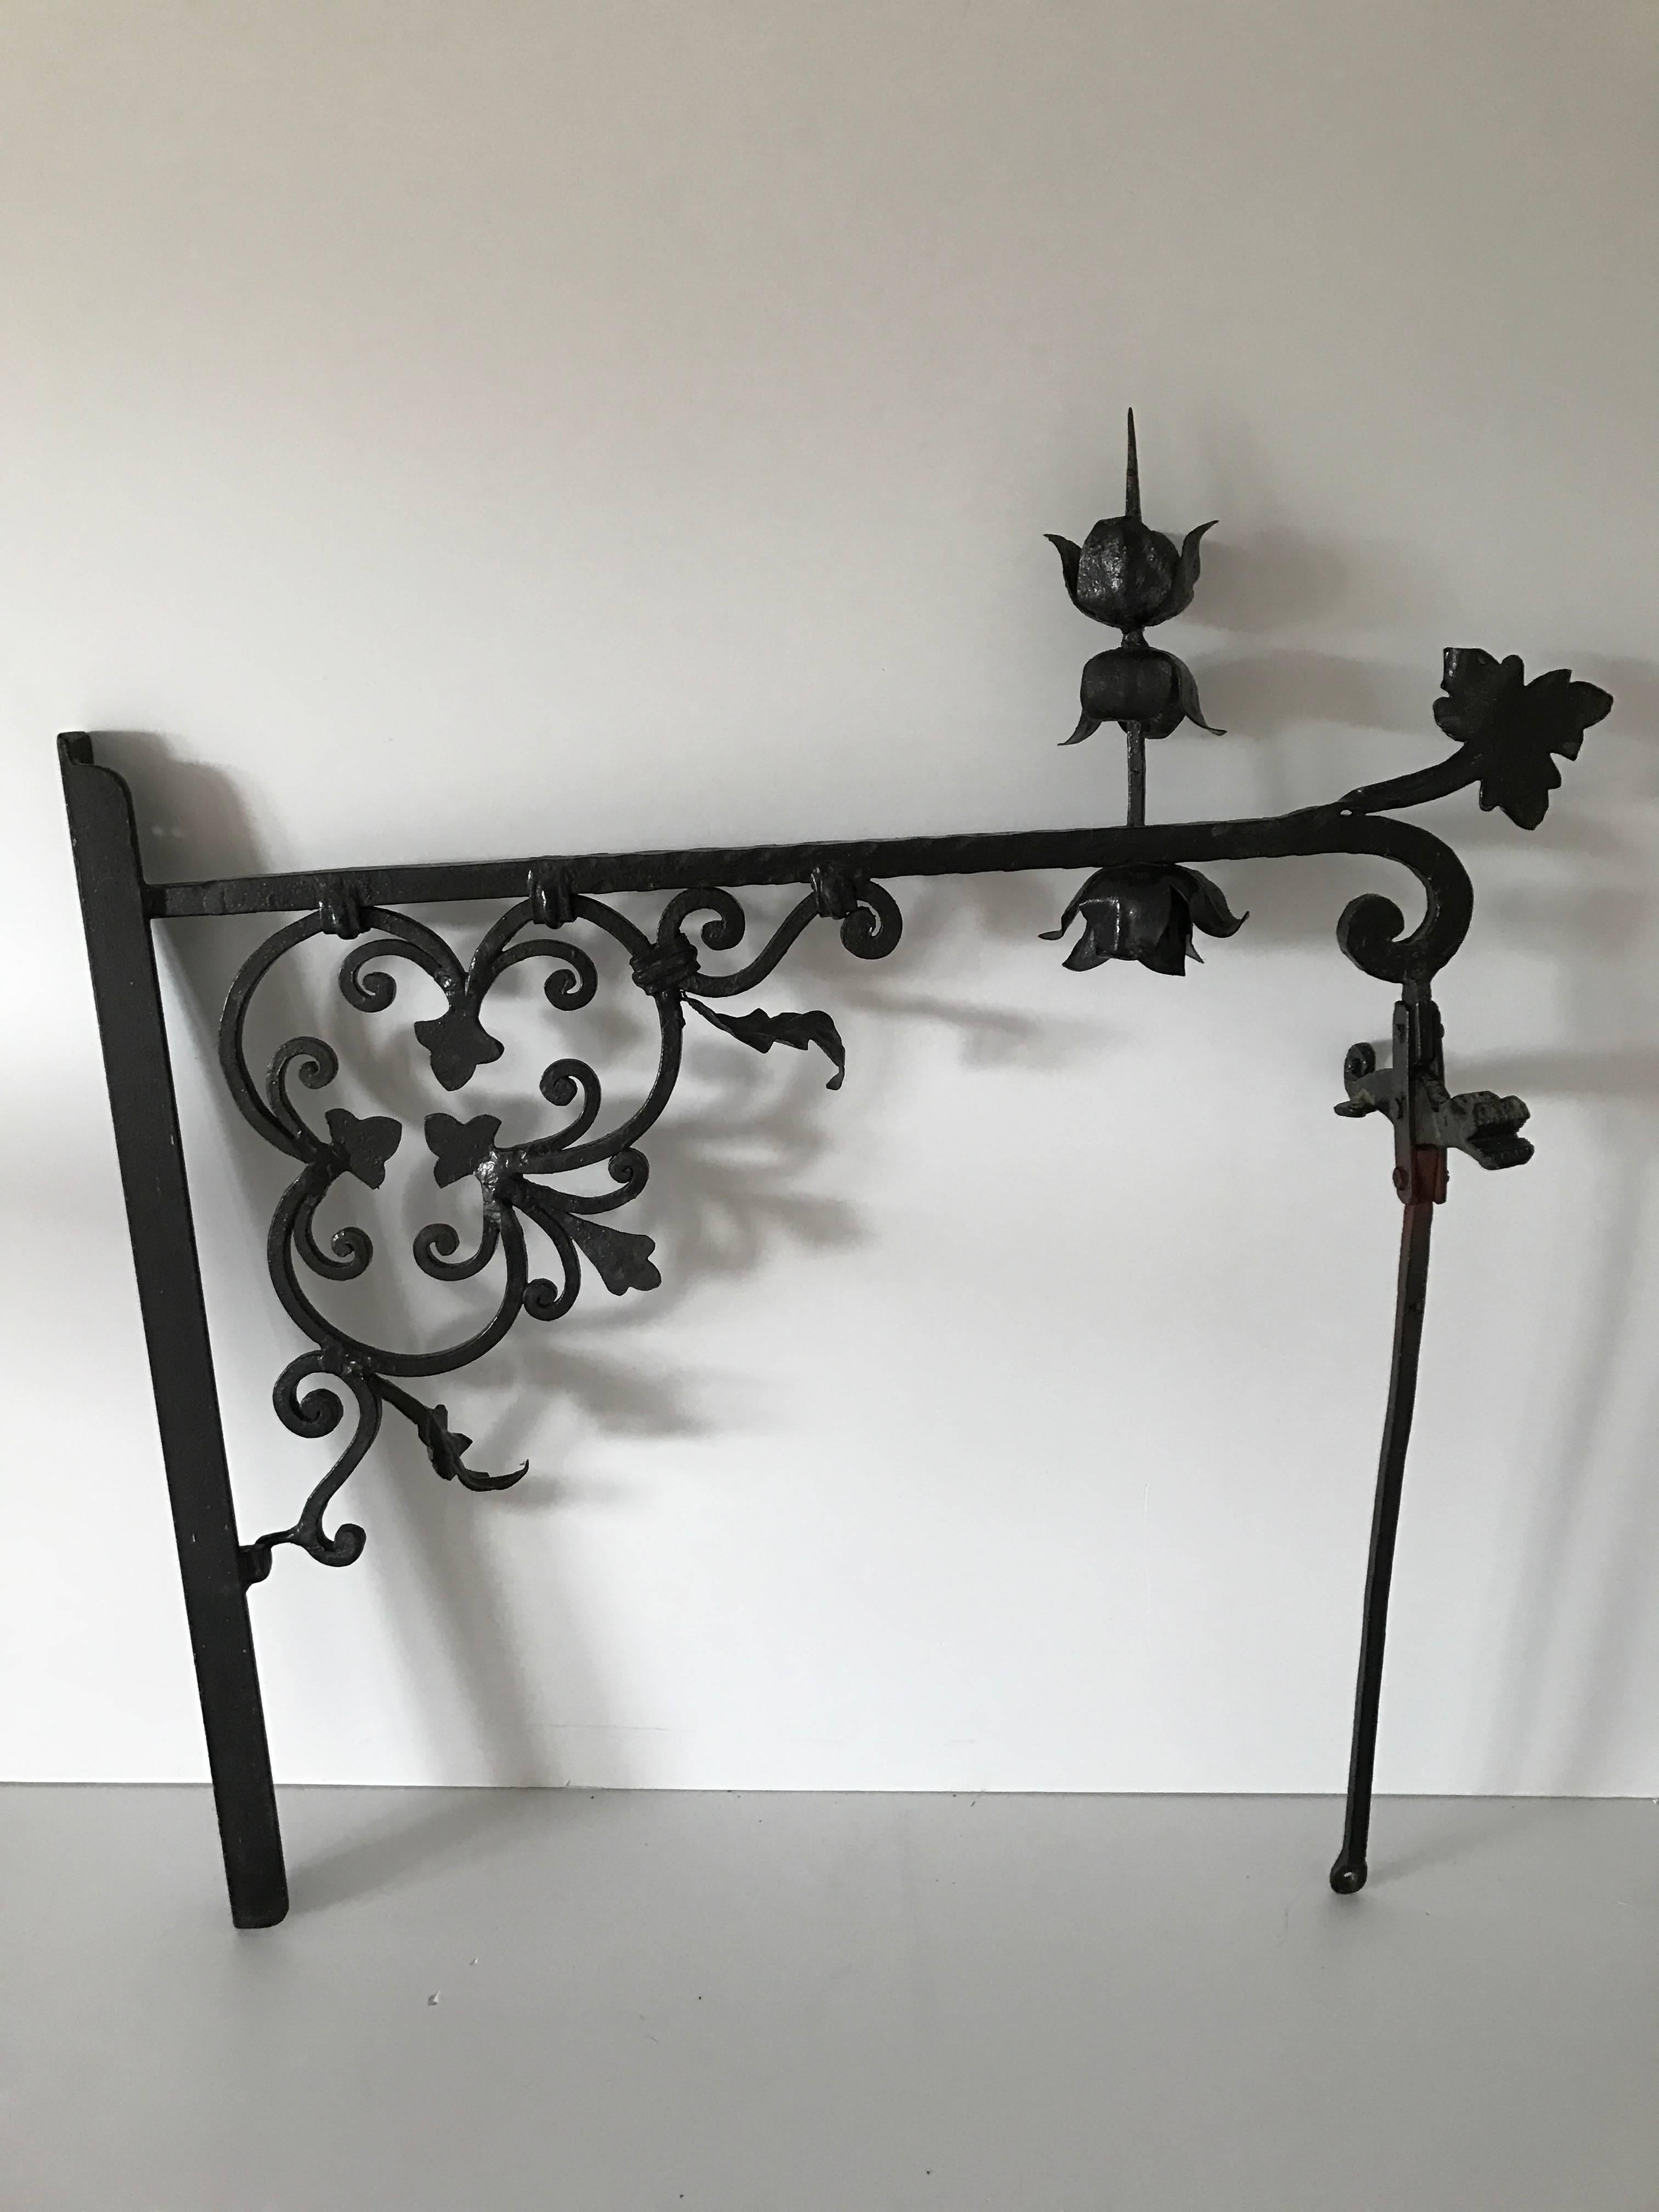 19th century Swedish wrought iron sign bracket, shopsign holder.
A beautiful sign bracket made of wrought iron, beautiful roses and leaf including the wonderful small dragon above the jointed sign stay.
It is in a fantastic condition without any